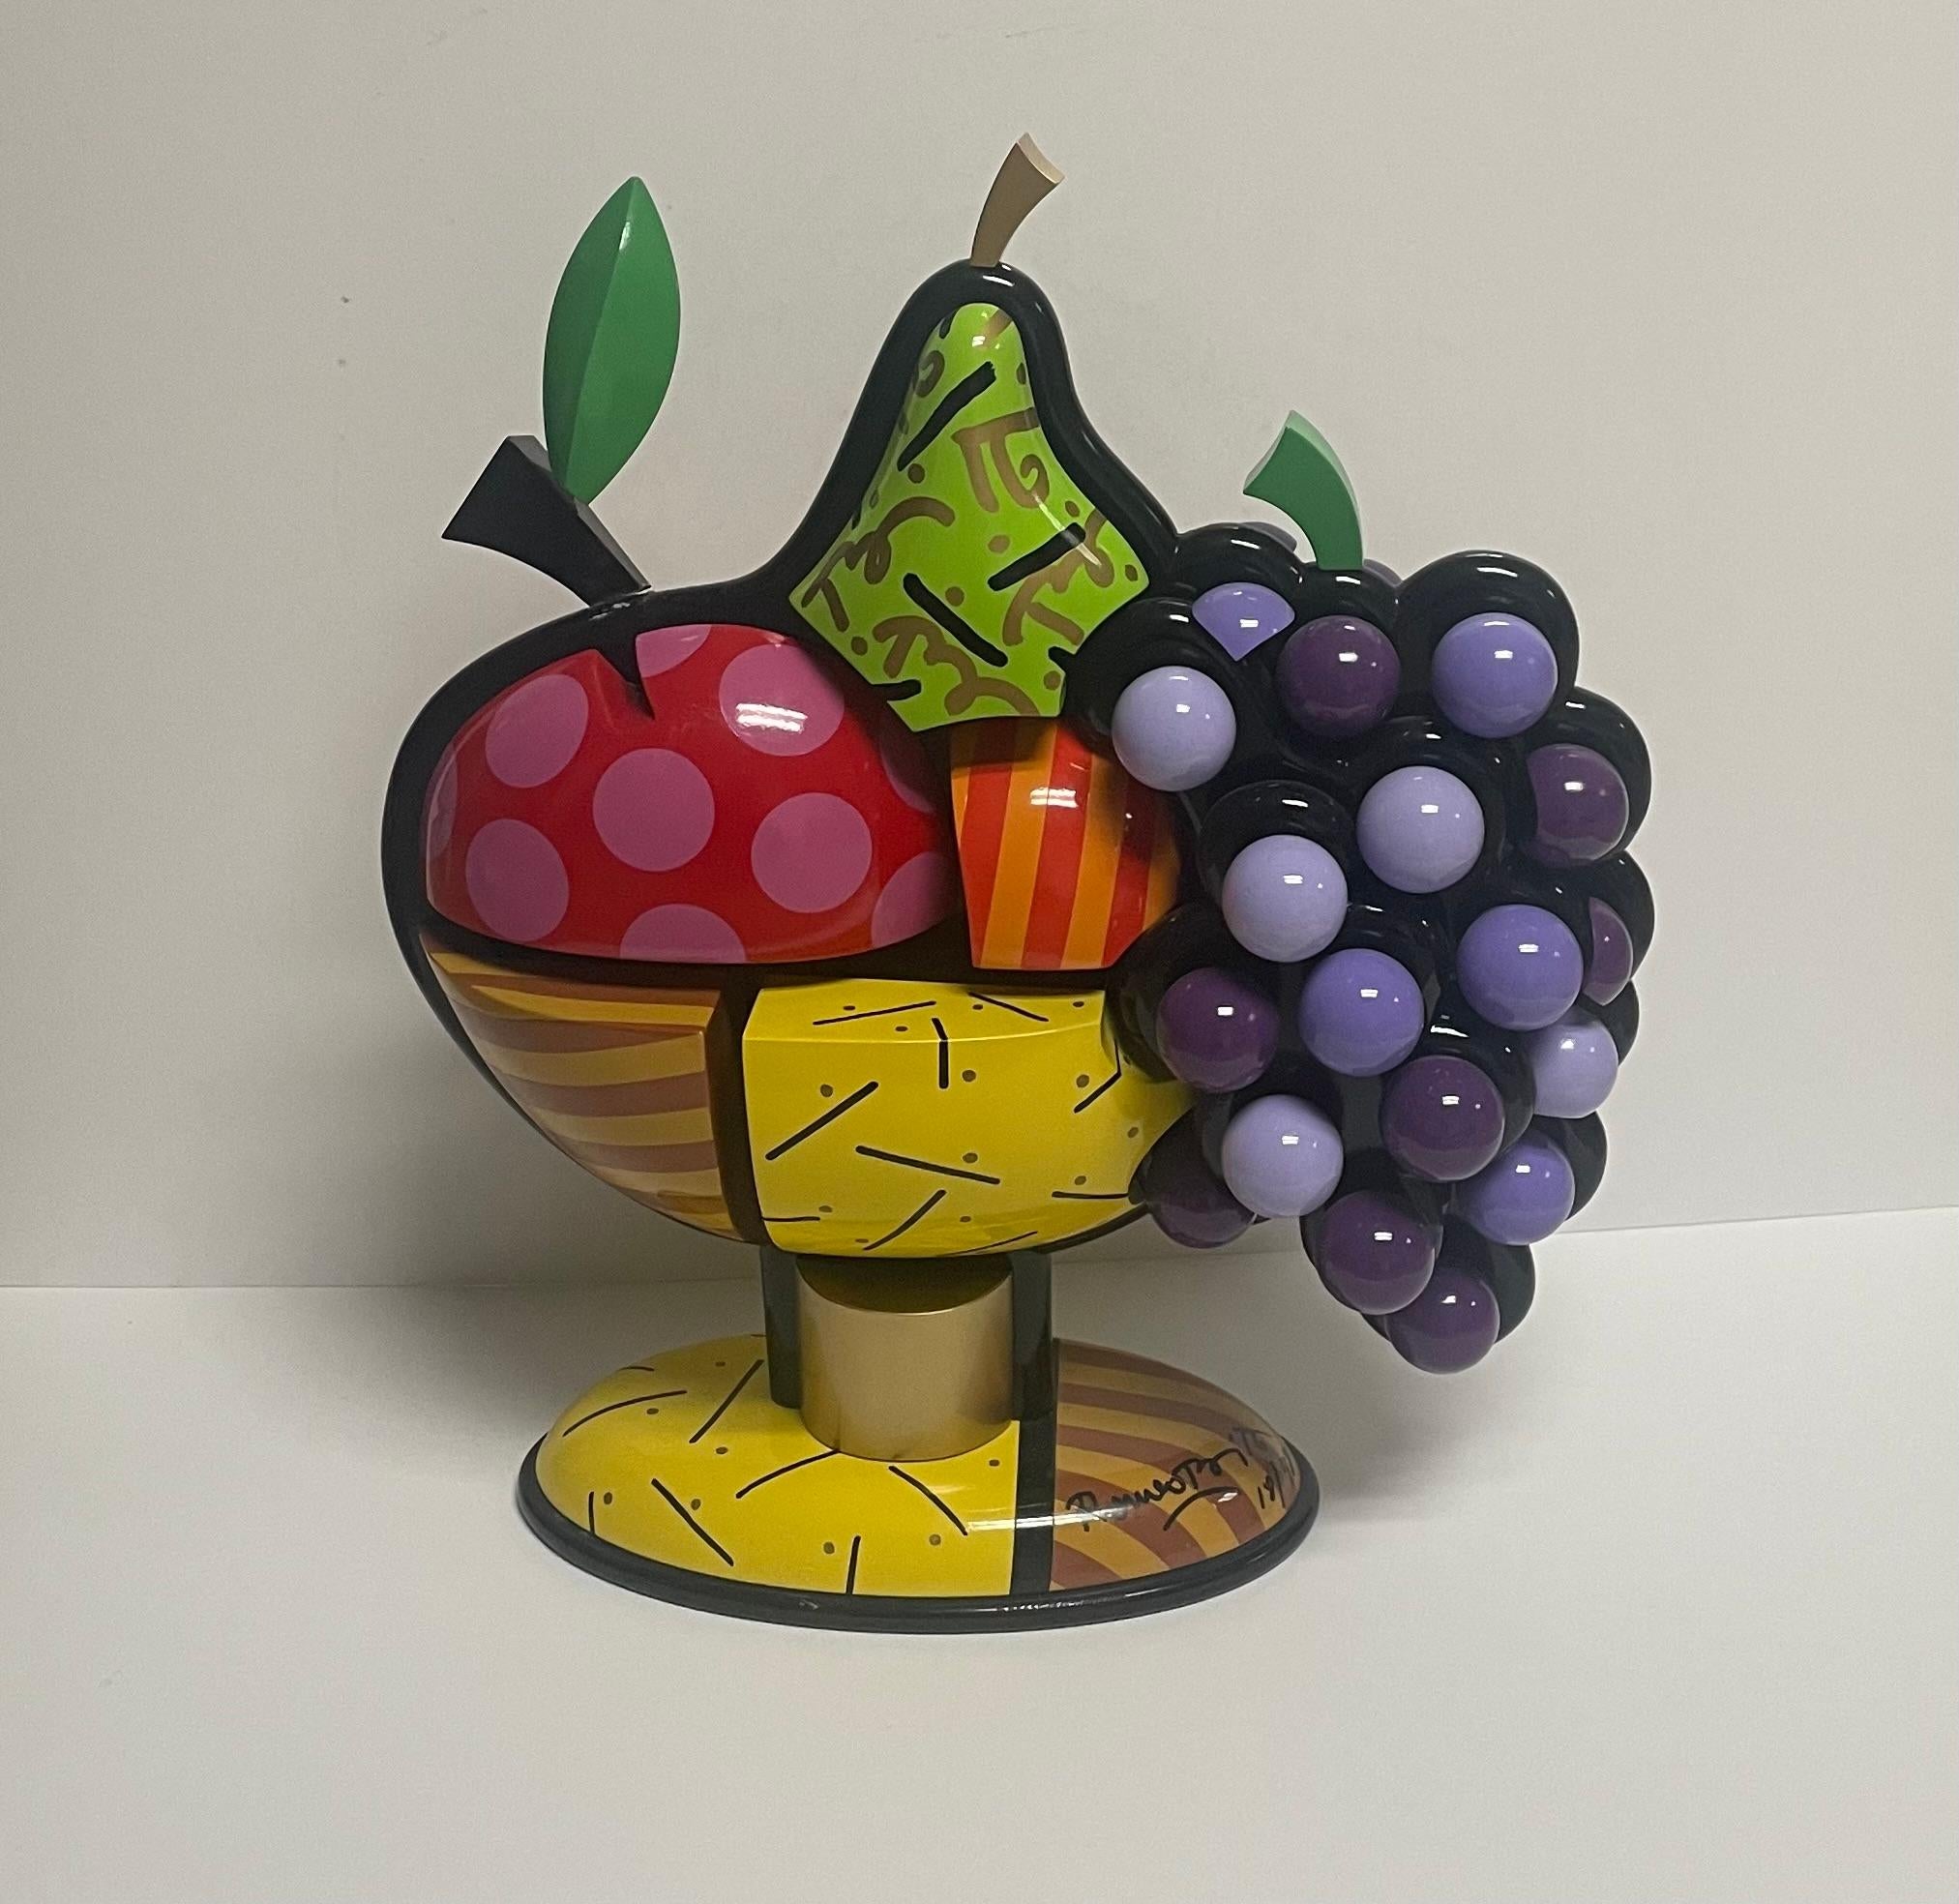 "Bowl of Fruit" - Sculpture by Romero Britto